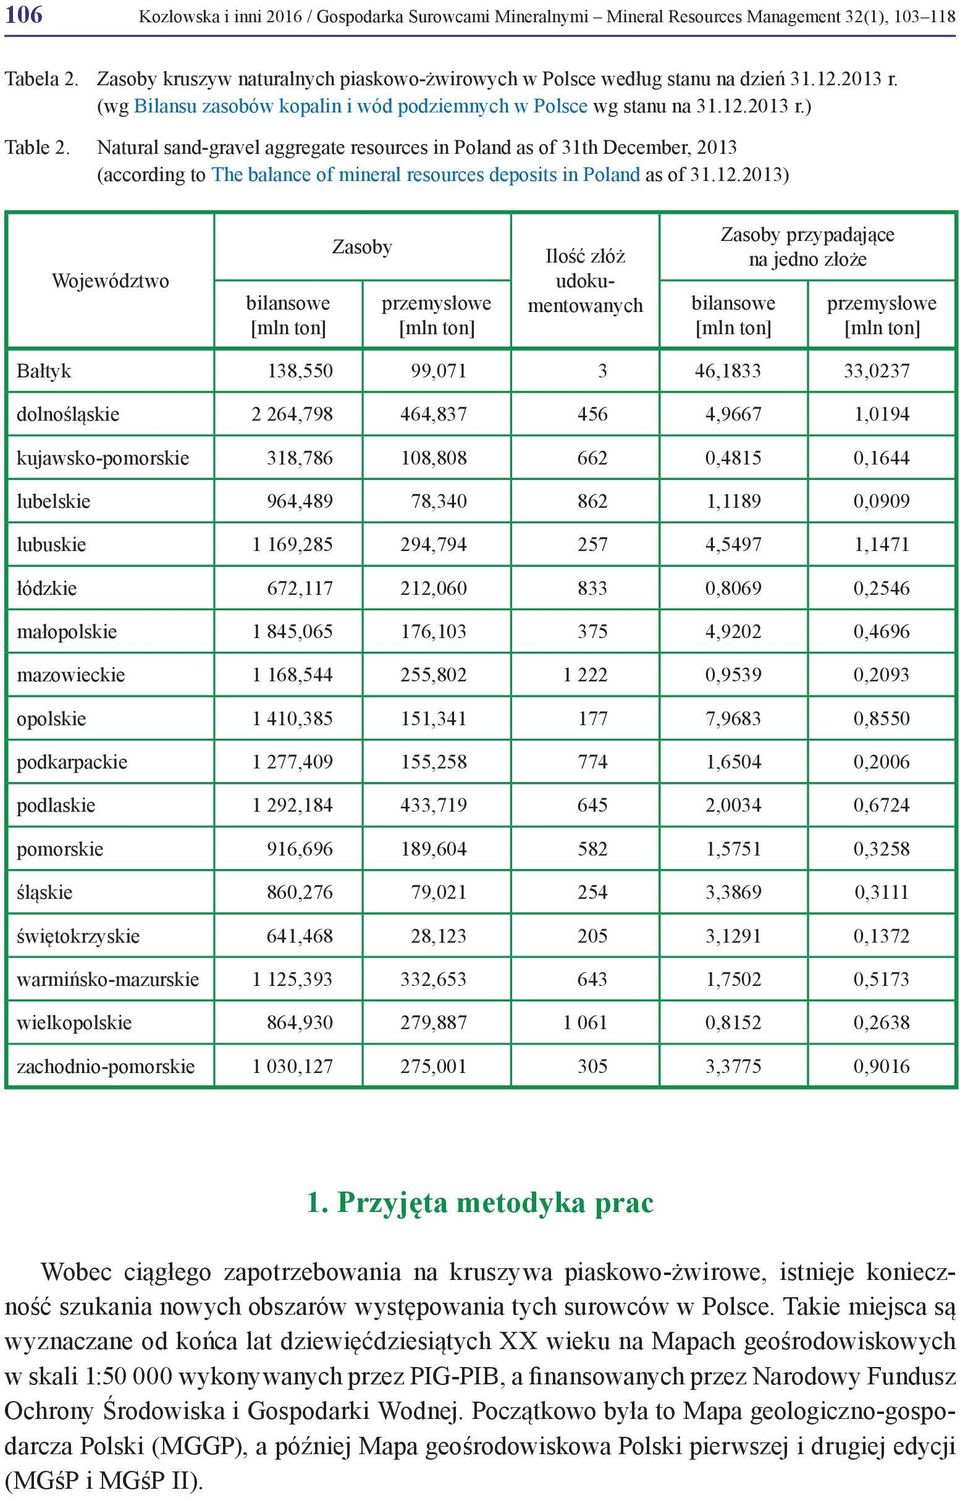 Natural sand-gravel aggregate resources in Poland as of 31th December, 2013 (according to The balance of mineral resources deposits in Poland as of 31.12.